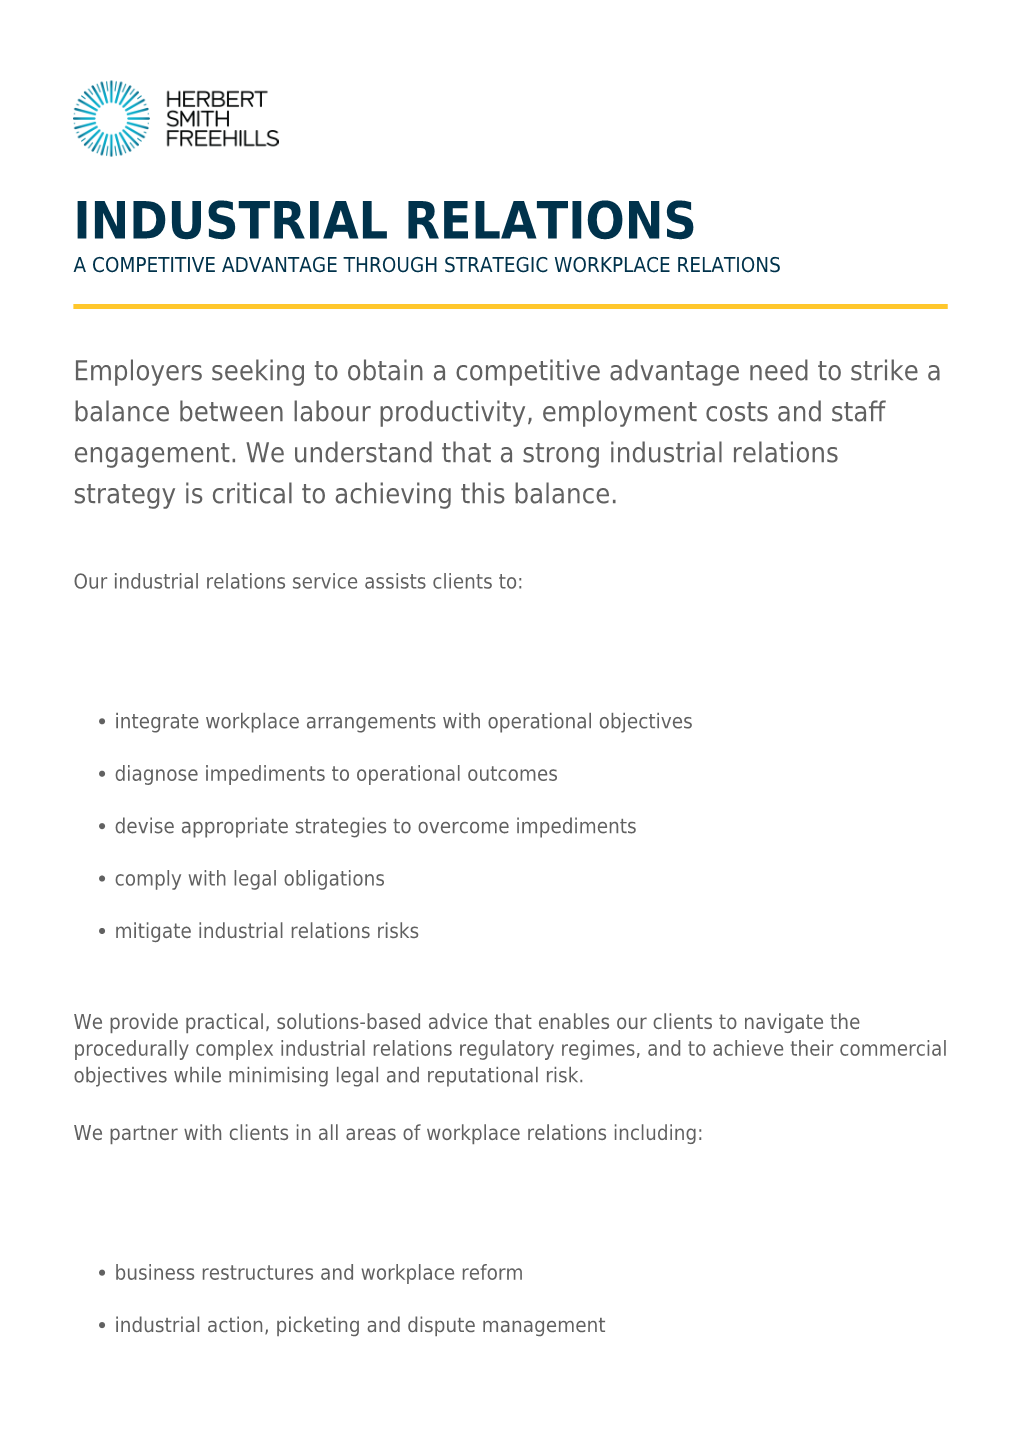 Industrial Relations a Competitive Advantage Through Strategic Workplace Relations